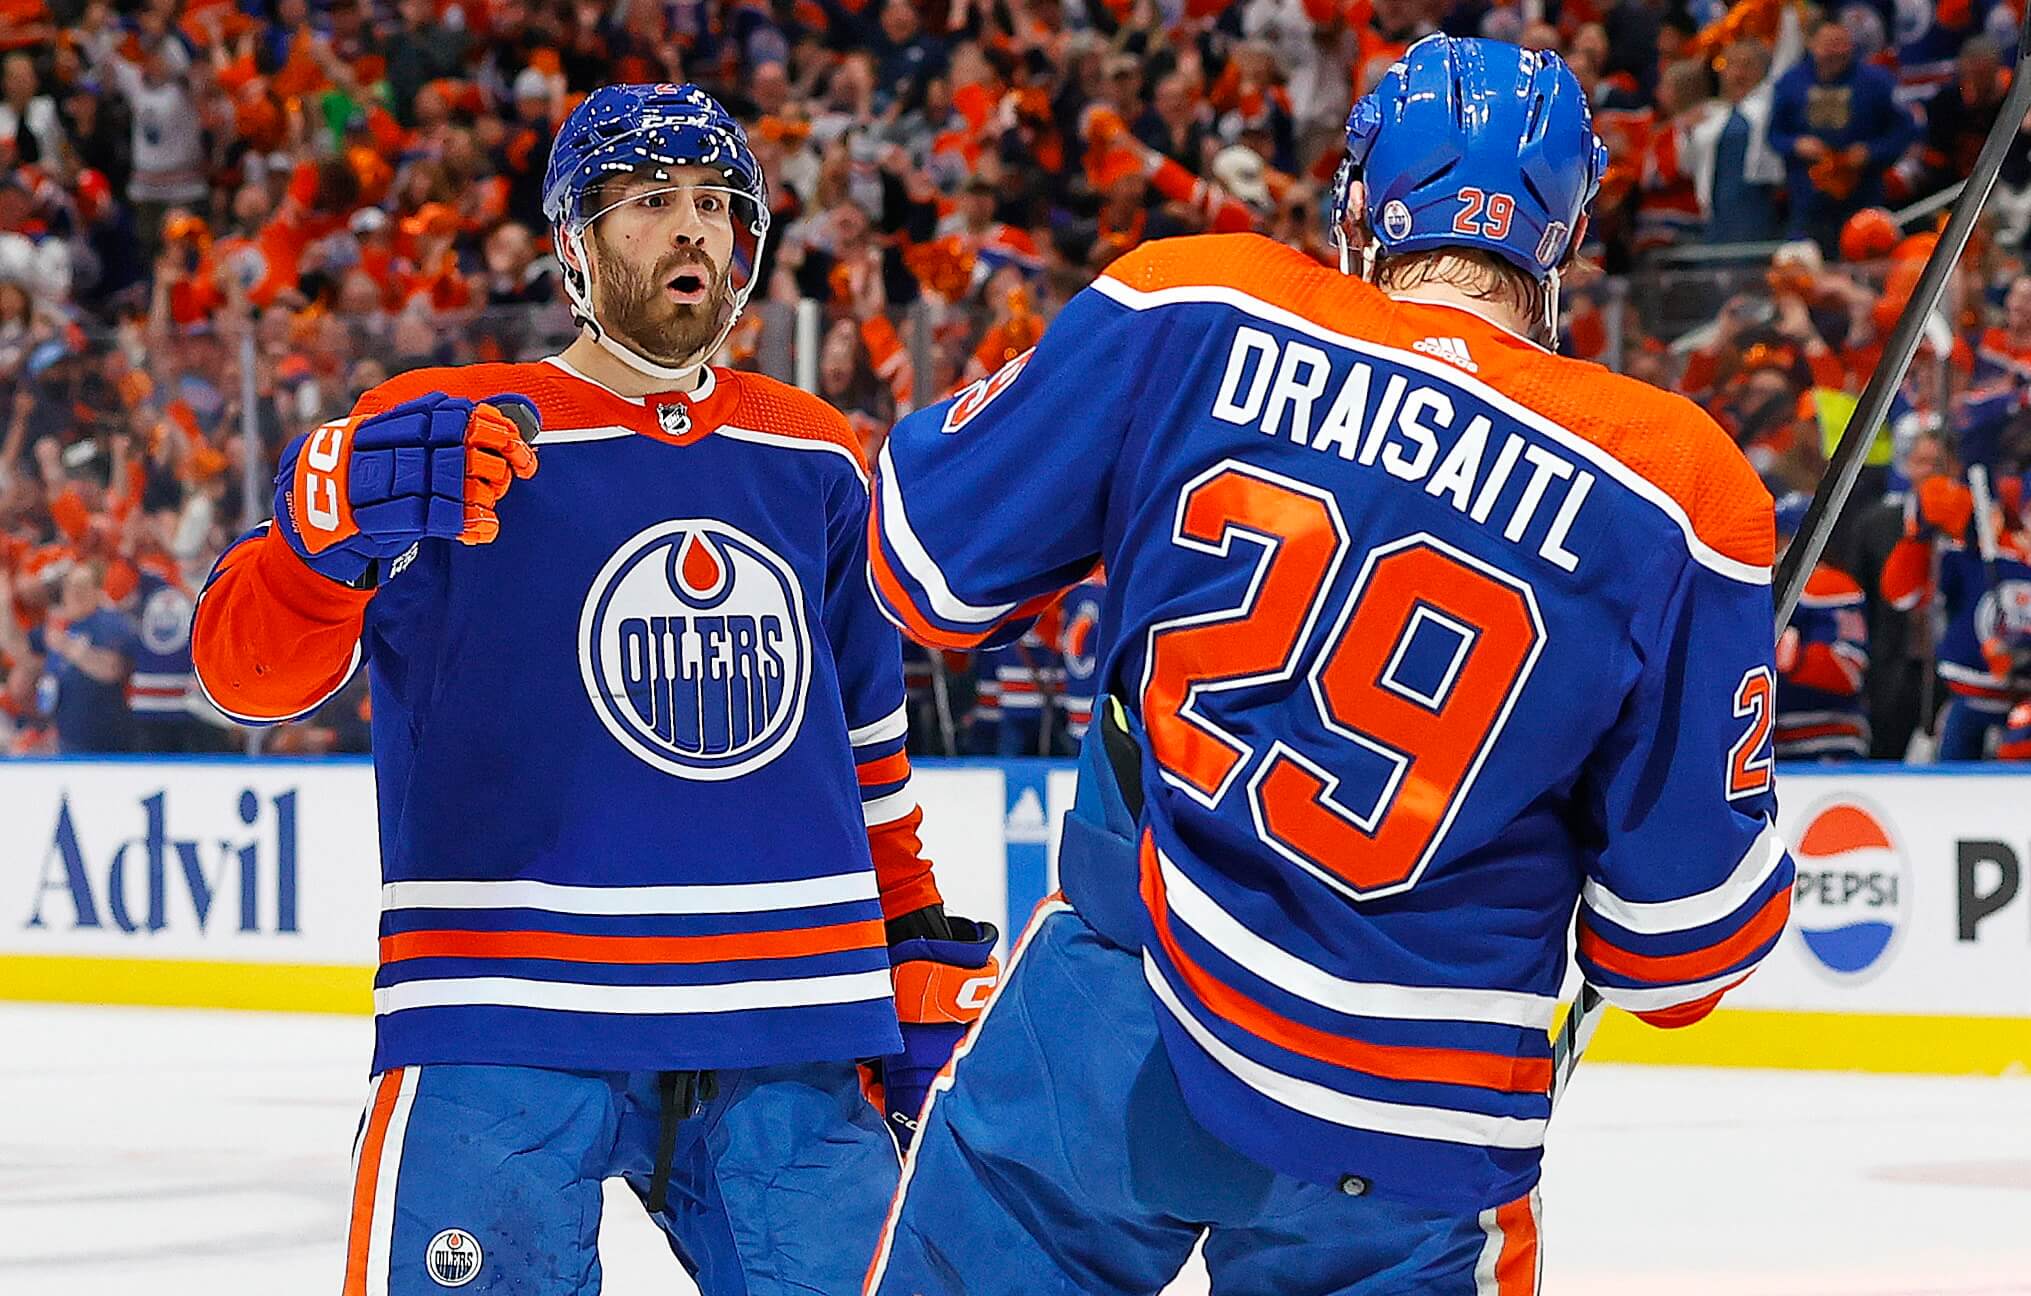 How Oilers survived improbable Canucks rally to win Game 4